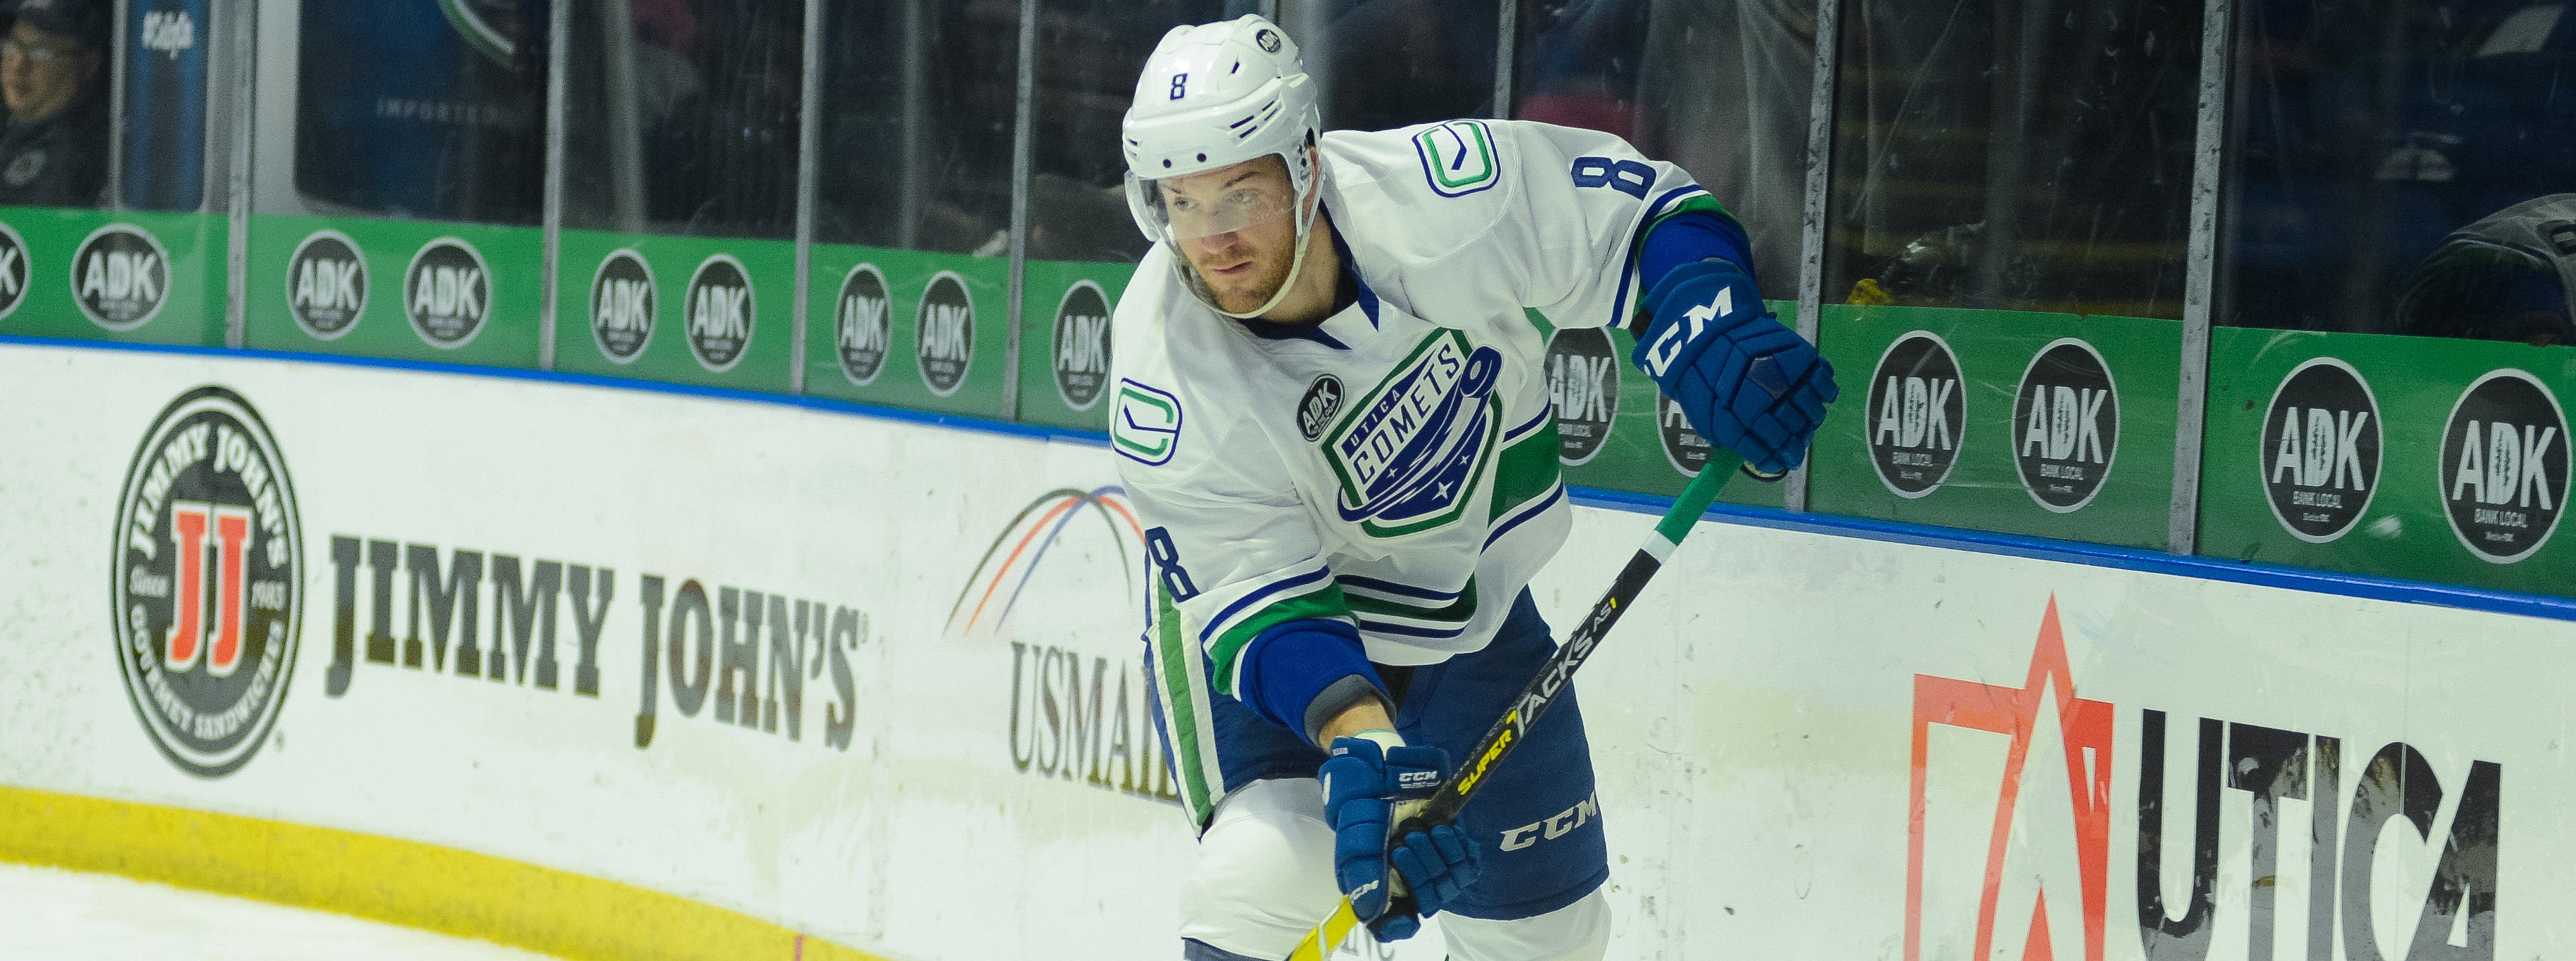 COMETS HOST DEFENDING CHAMPION CHECKERS